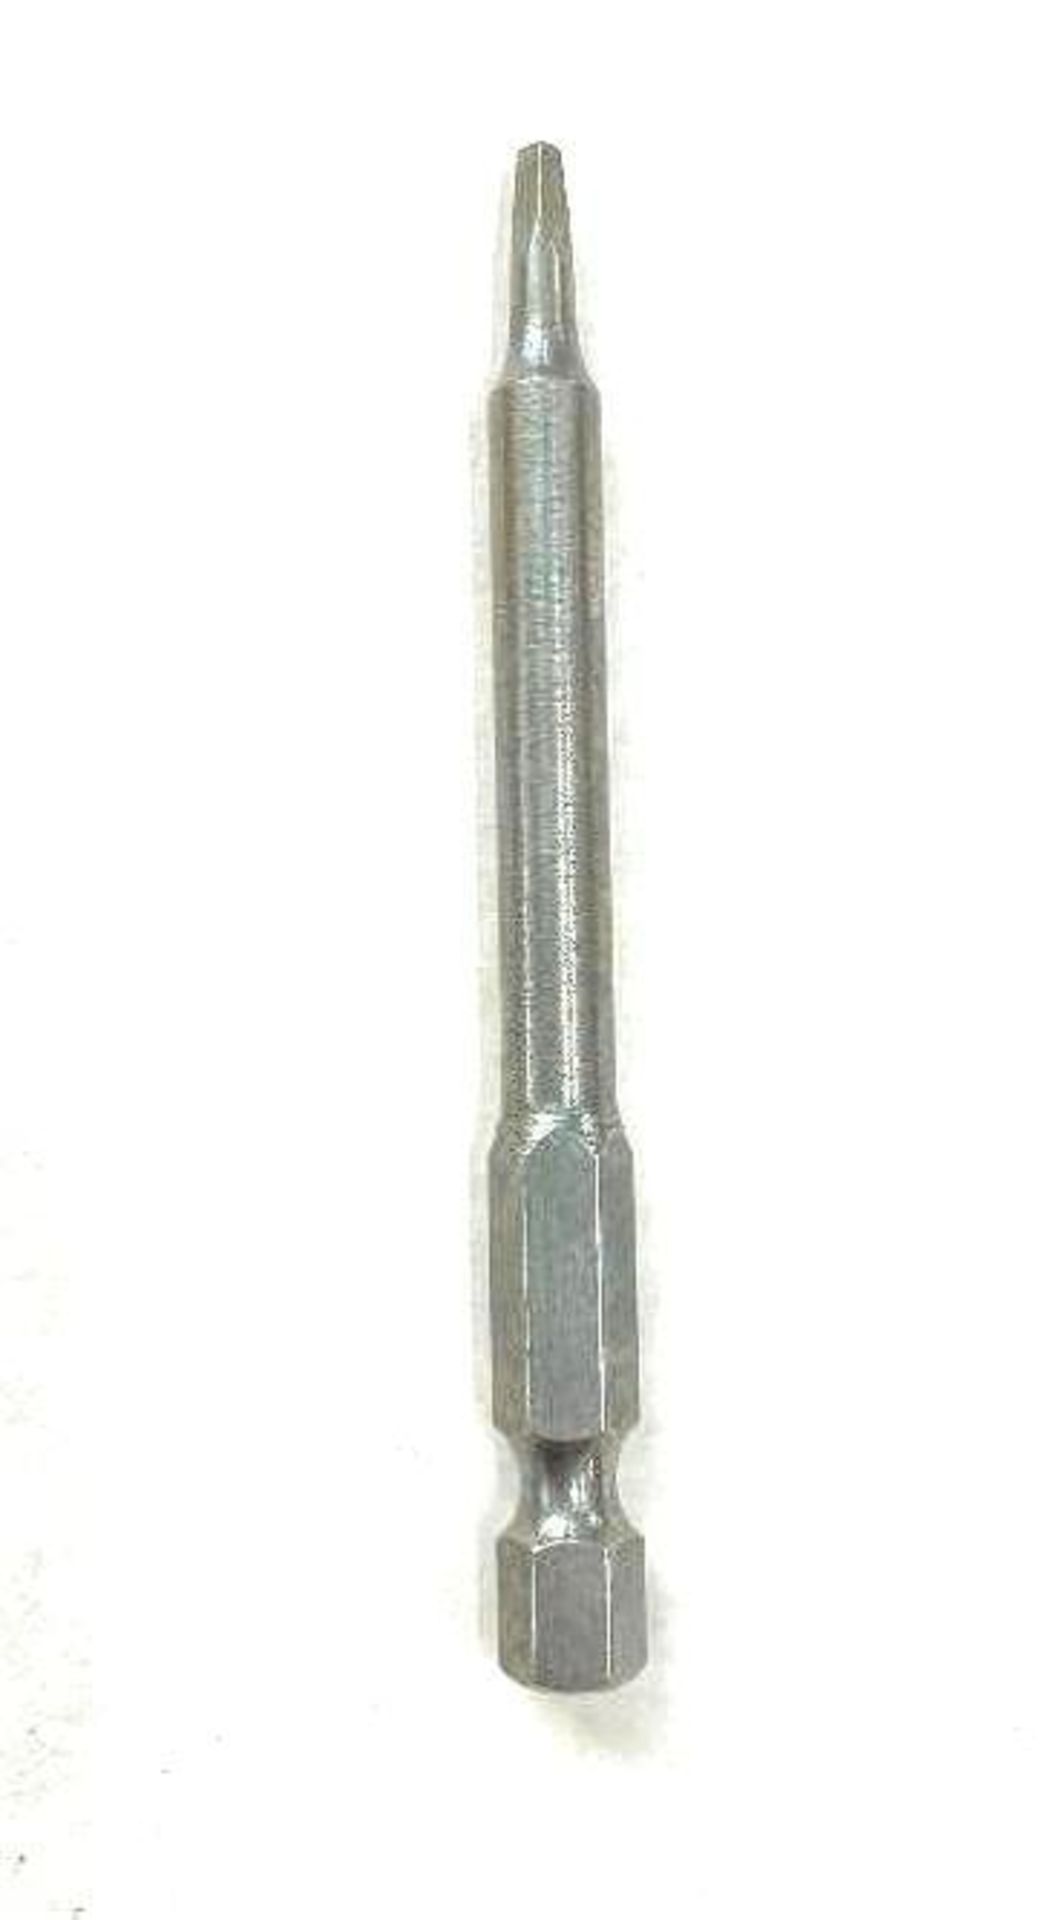 (1600) 3" SQUARE RECESS BIT-R0 BRAND/MODEL EAZYPOWER 79381 RETAIL PRICE (TOTAL): $3,280.00 LOCATION - Image 4 of 4